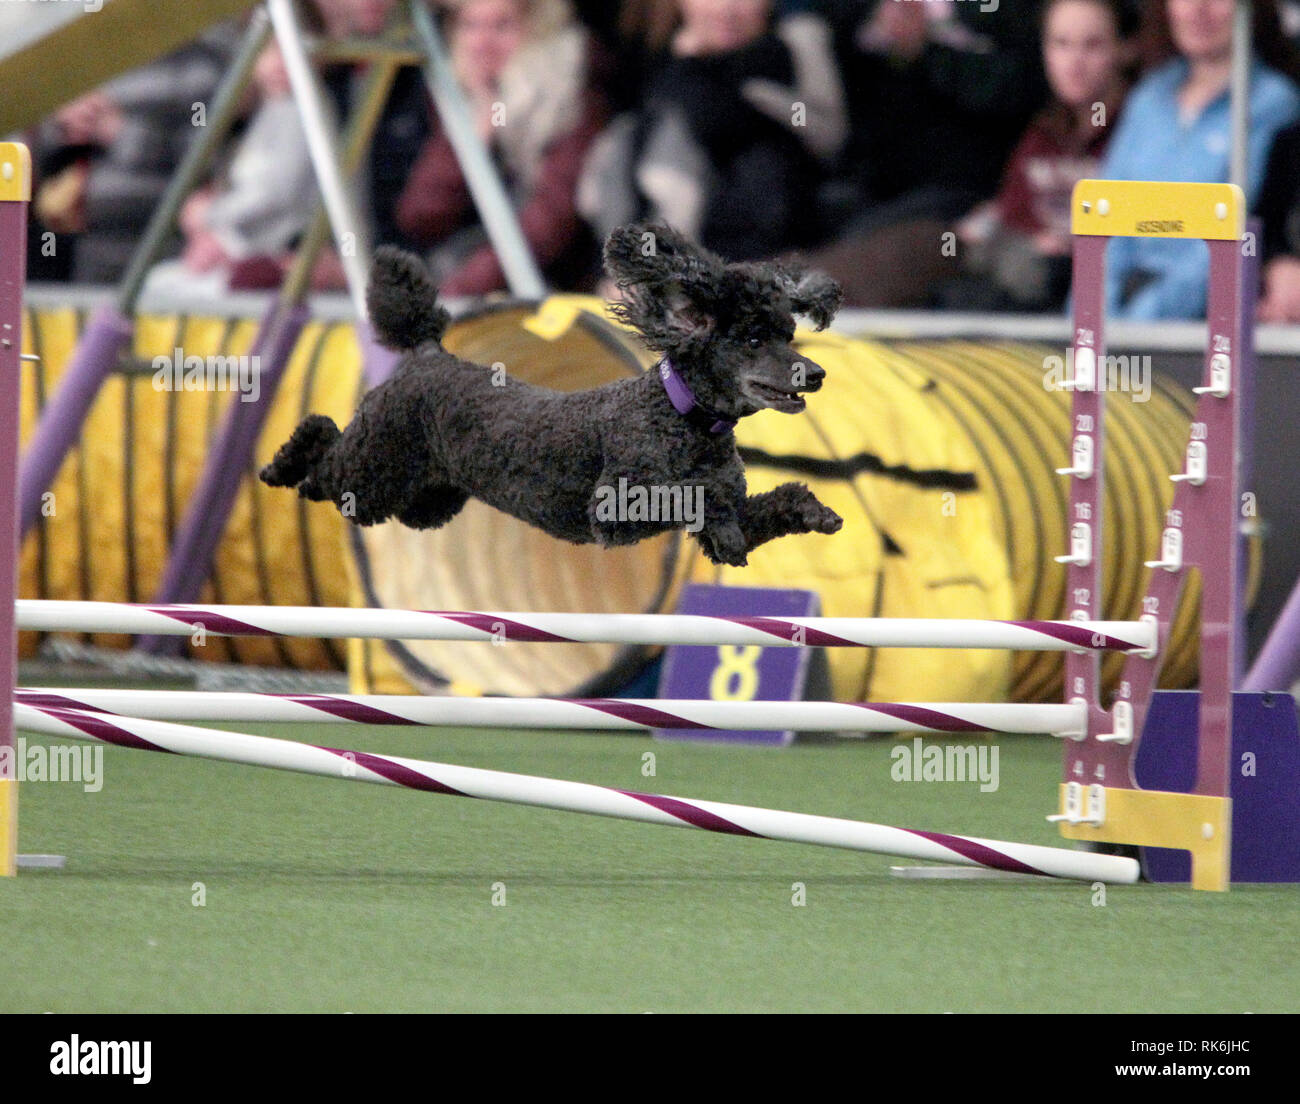 New York, USA. 9th Feb 2019. Chloe, A Poddle, competing in the preliminaries of the Westminster Kennel Club's Master's Agility Championship. Credit: Adam Stoltman/Alamy Live News Stock Photo